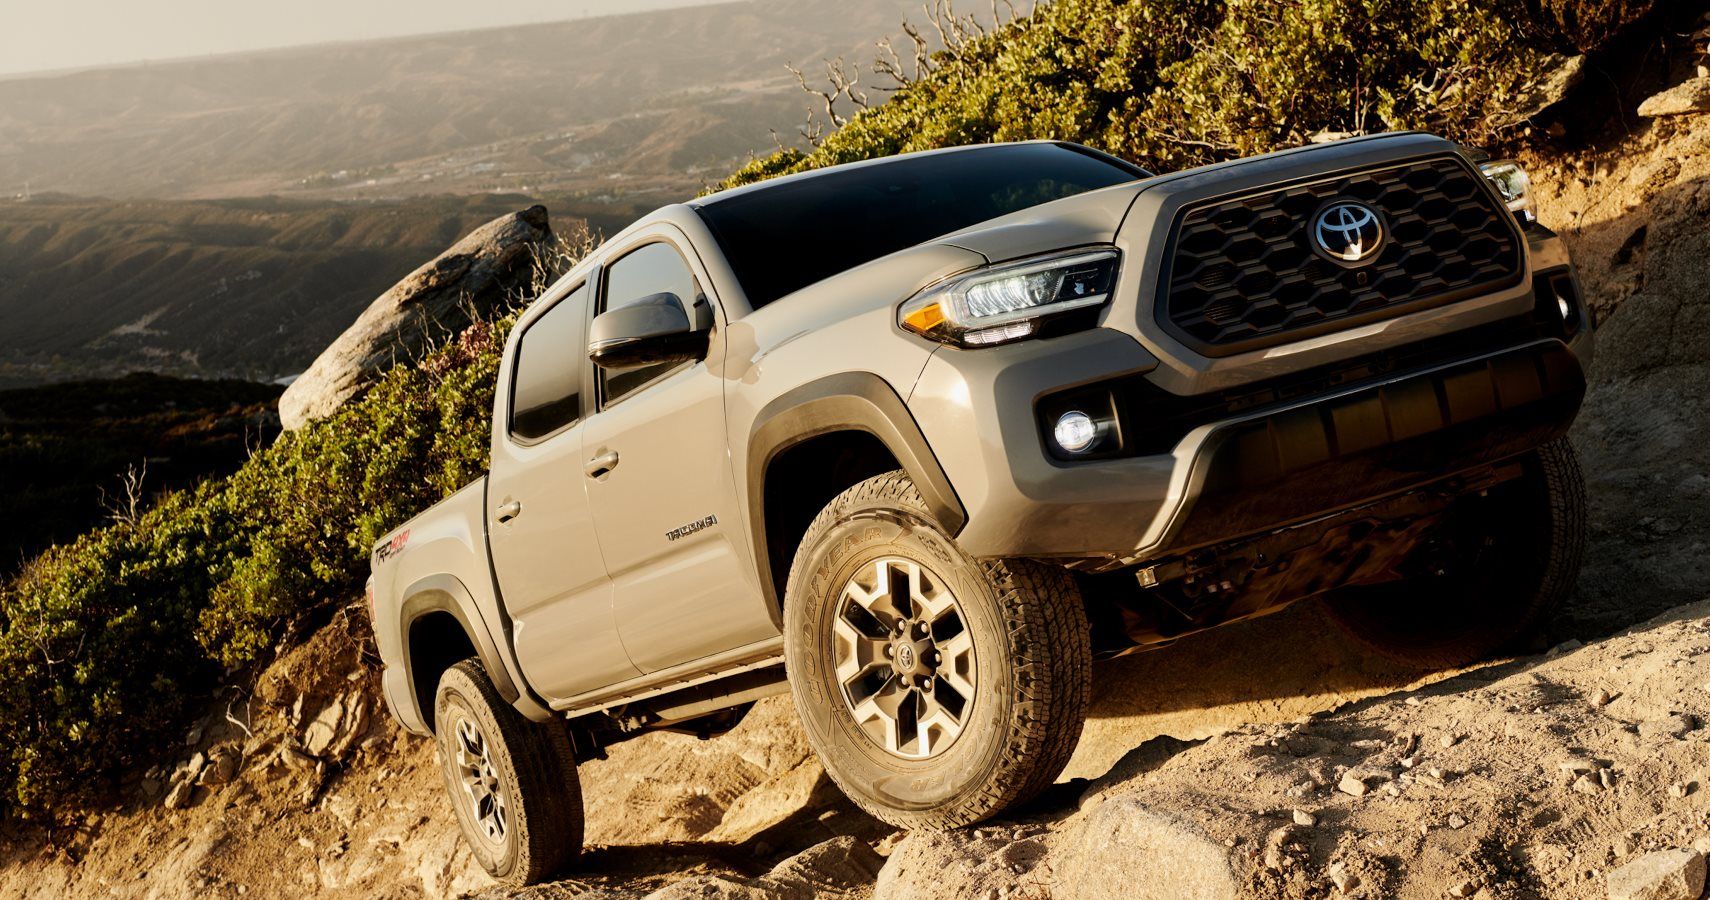 2020 Toyota Tacoma Takes On Ranger With Upgraded Tech